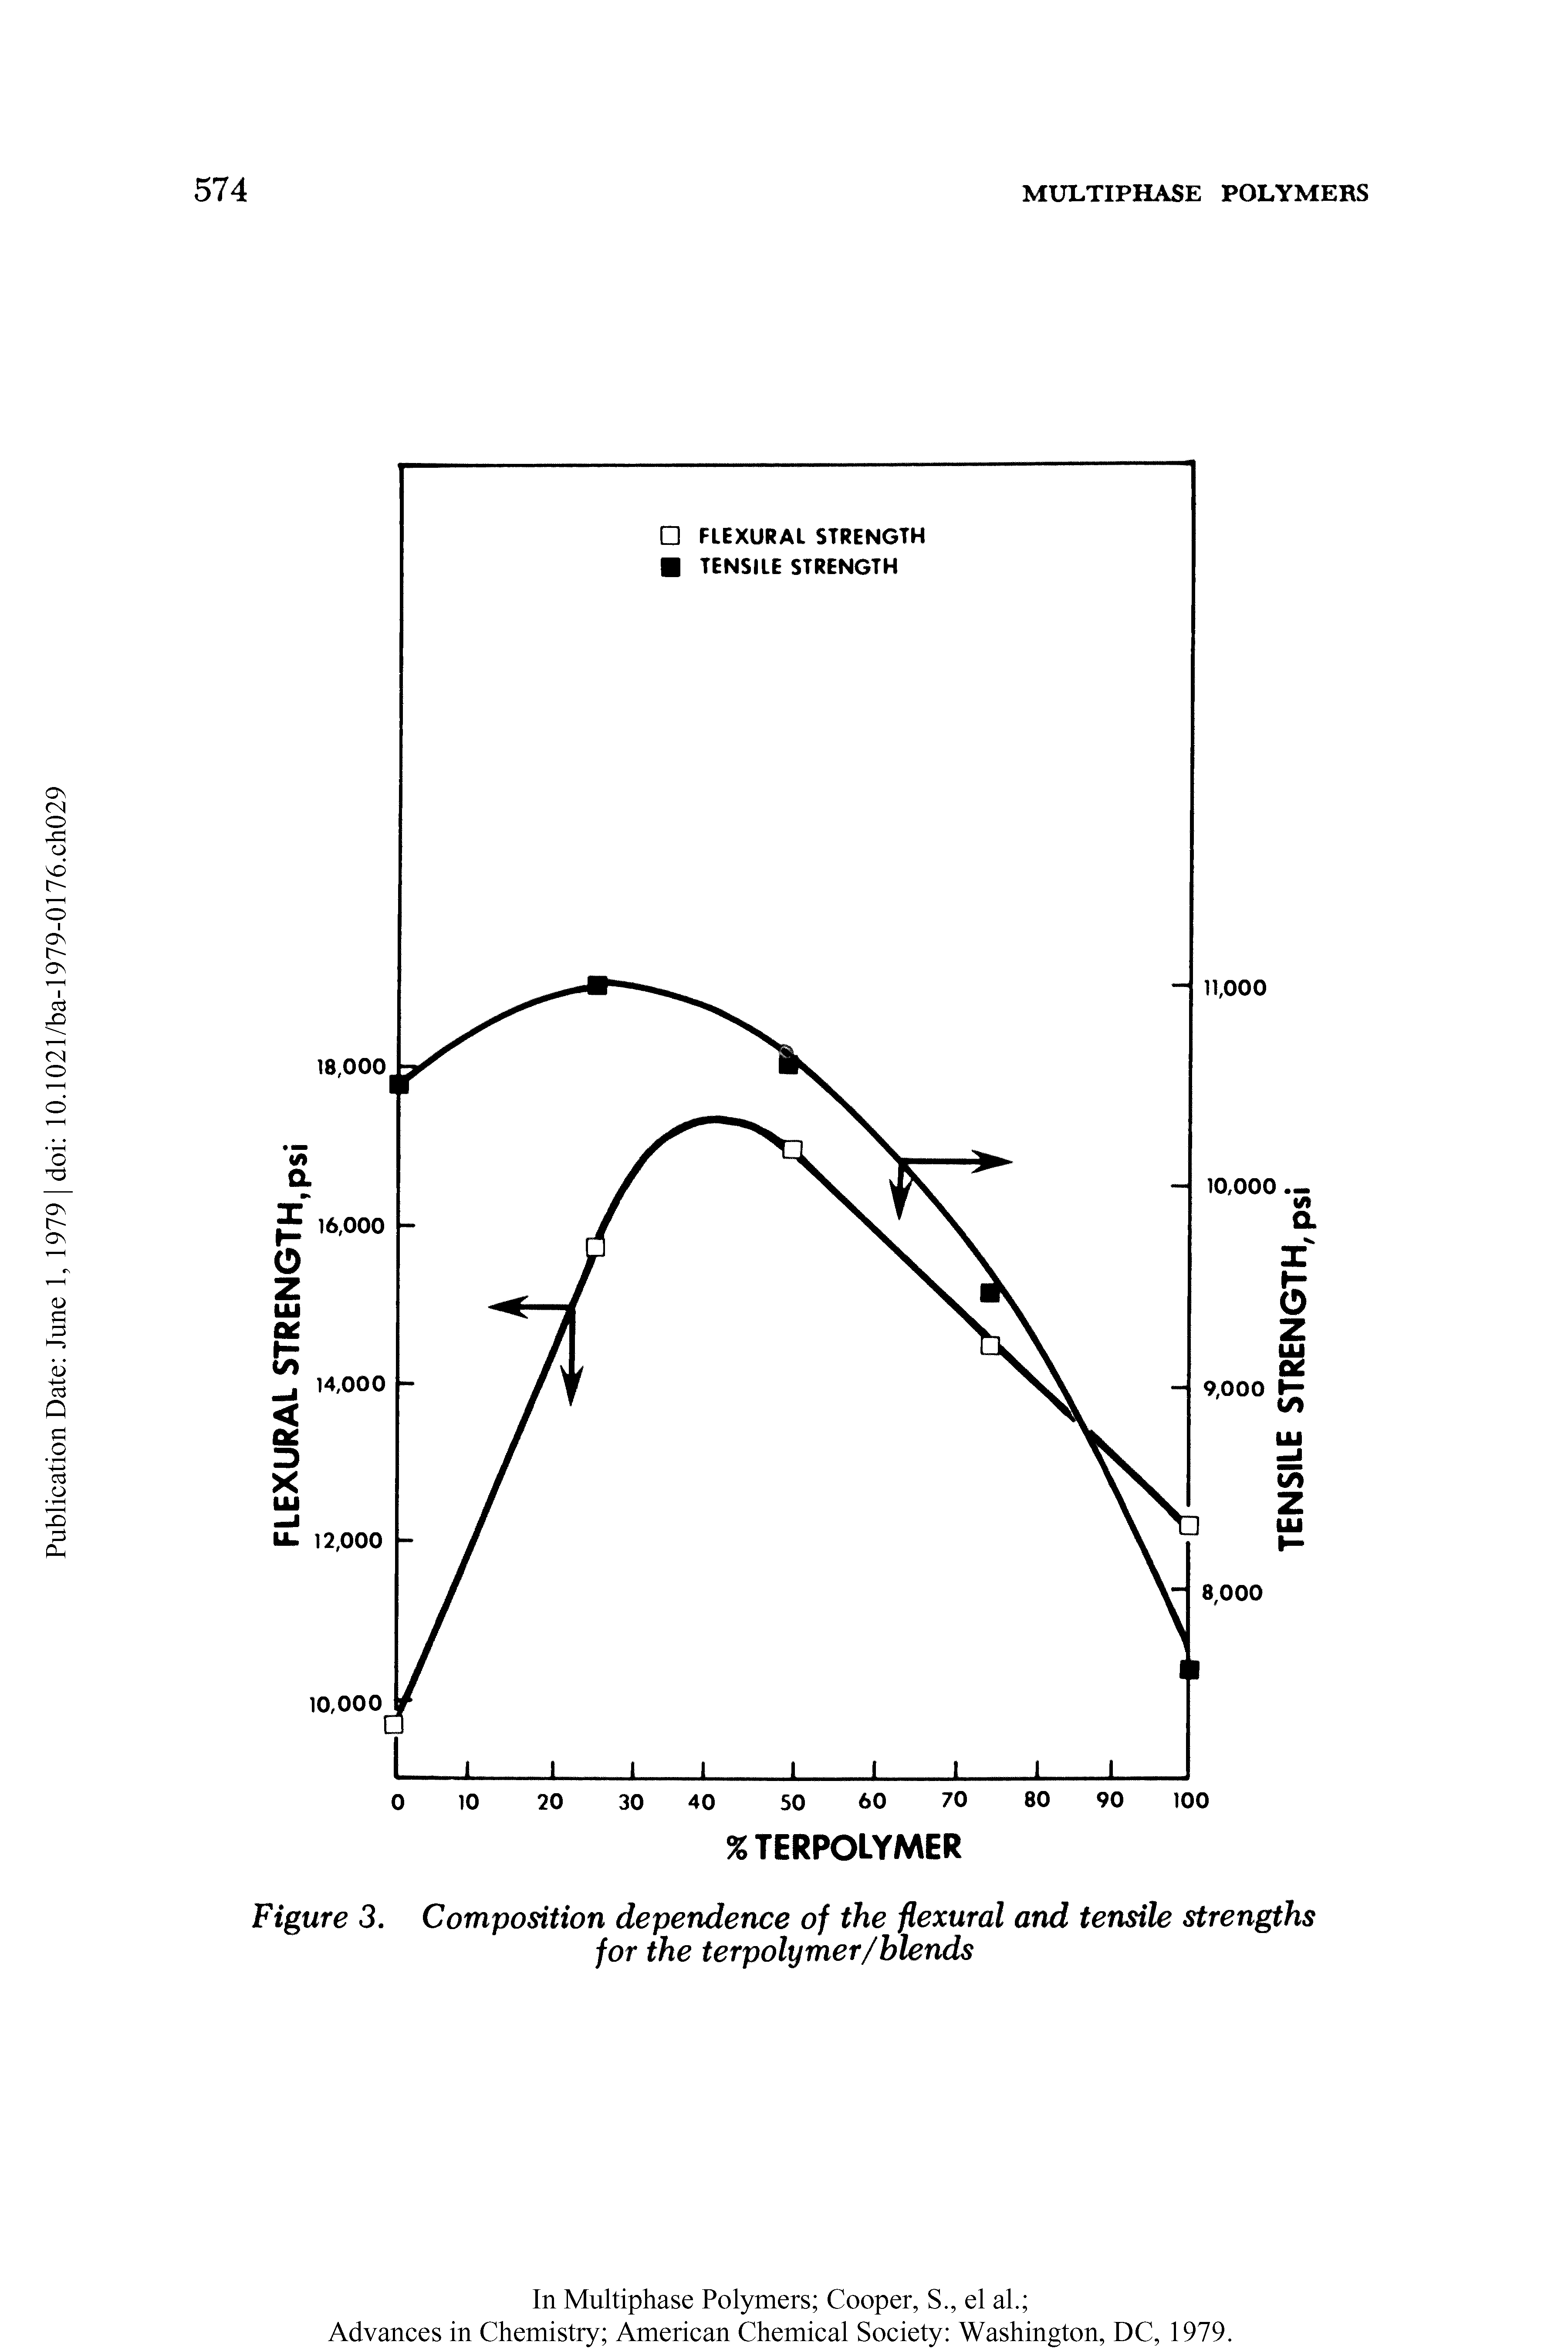 Figure 3. Composition dependence of the flexural and tensile strengths for the terpolymer/blends...